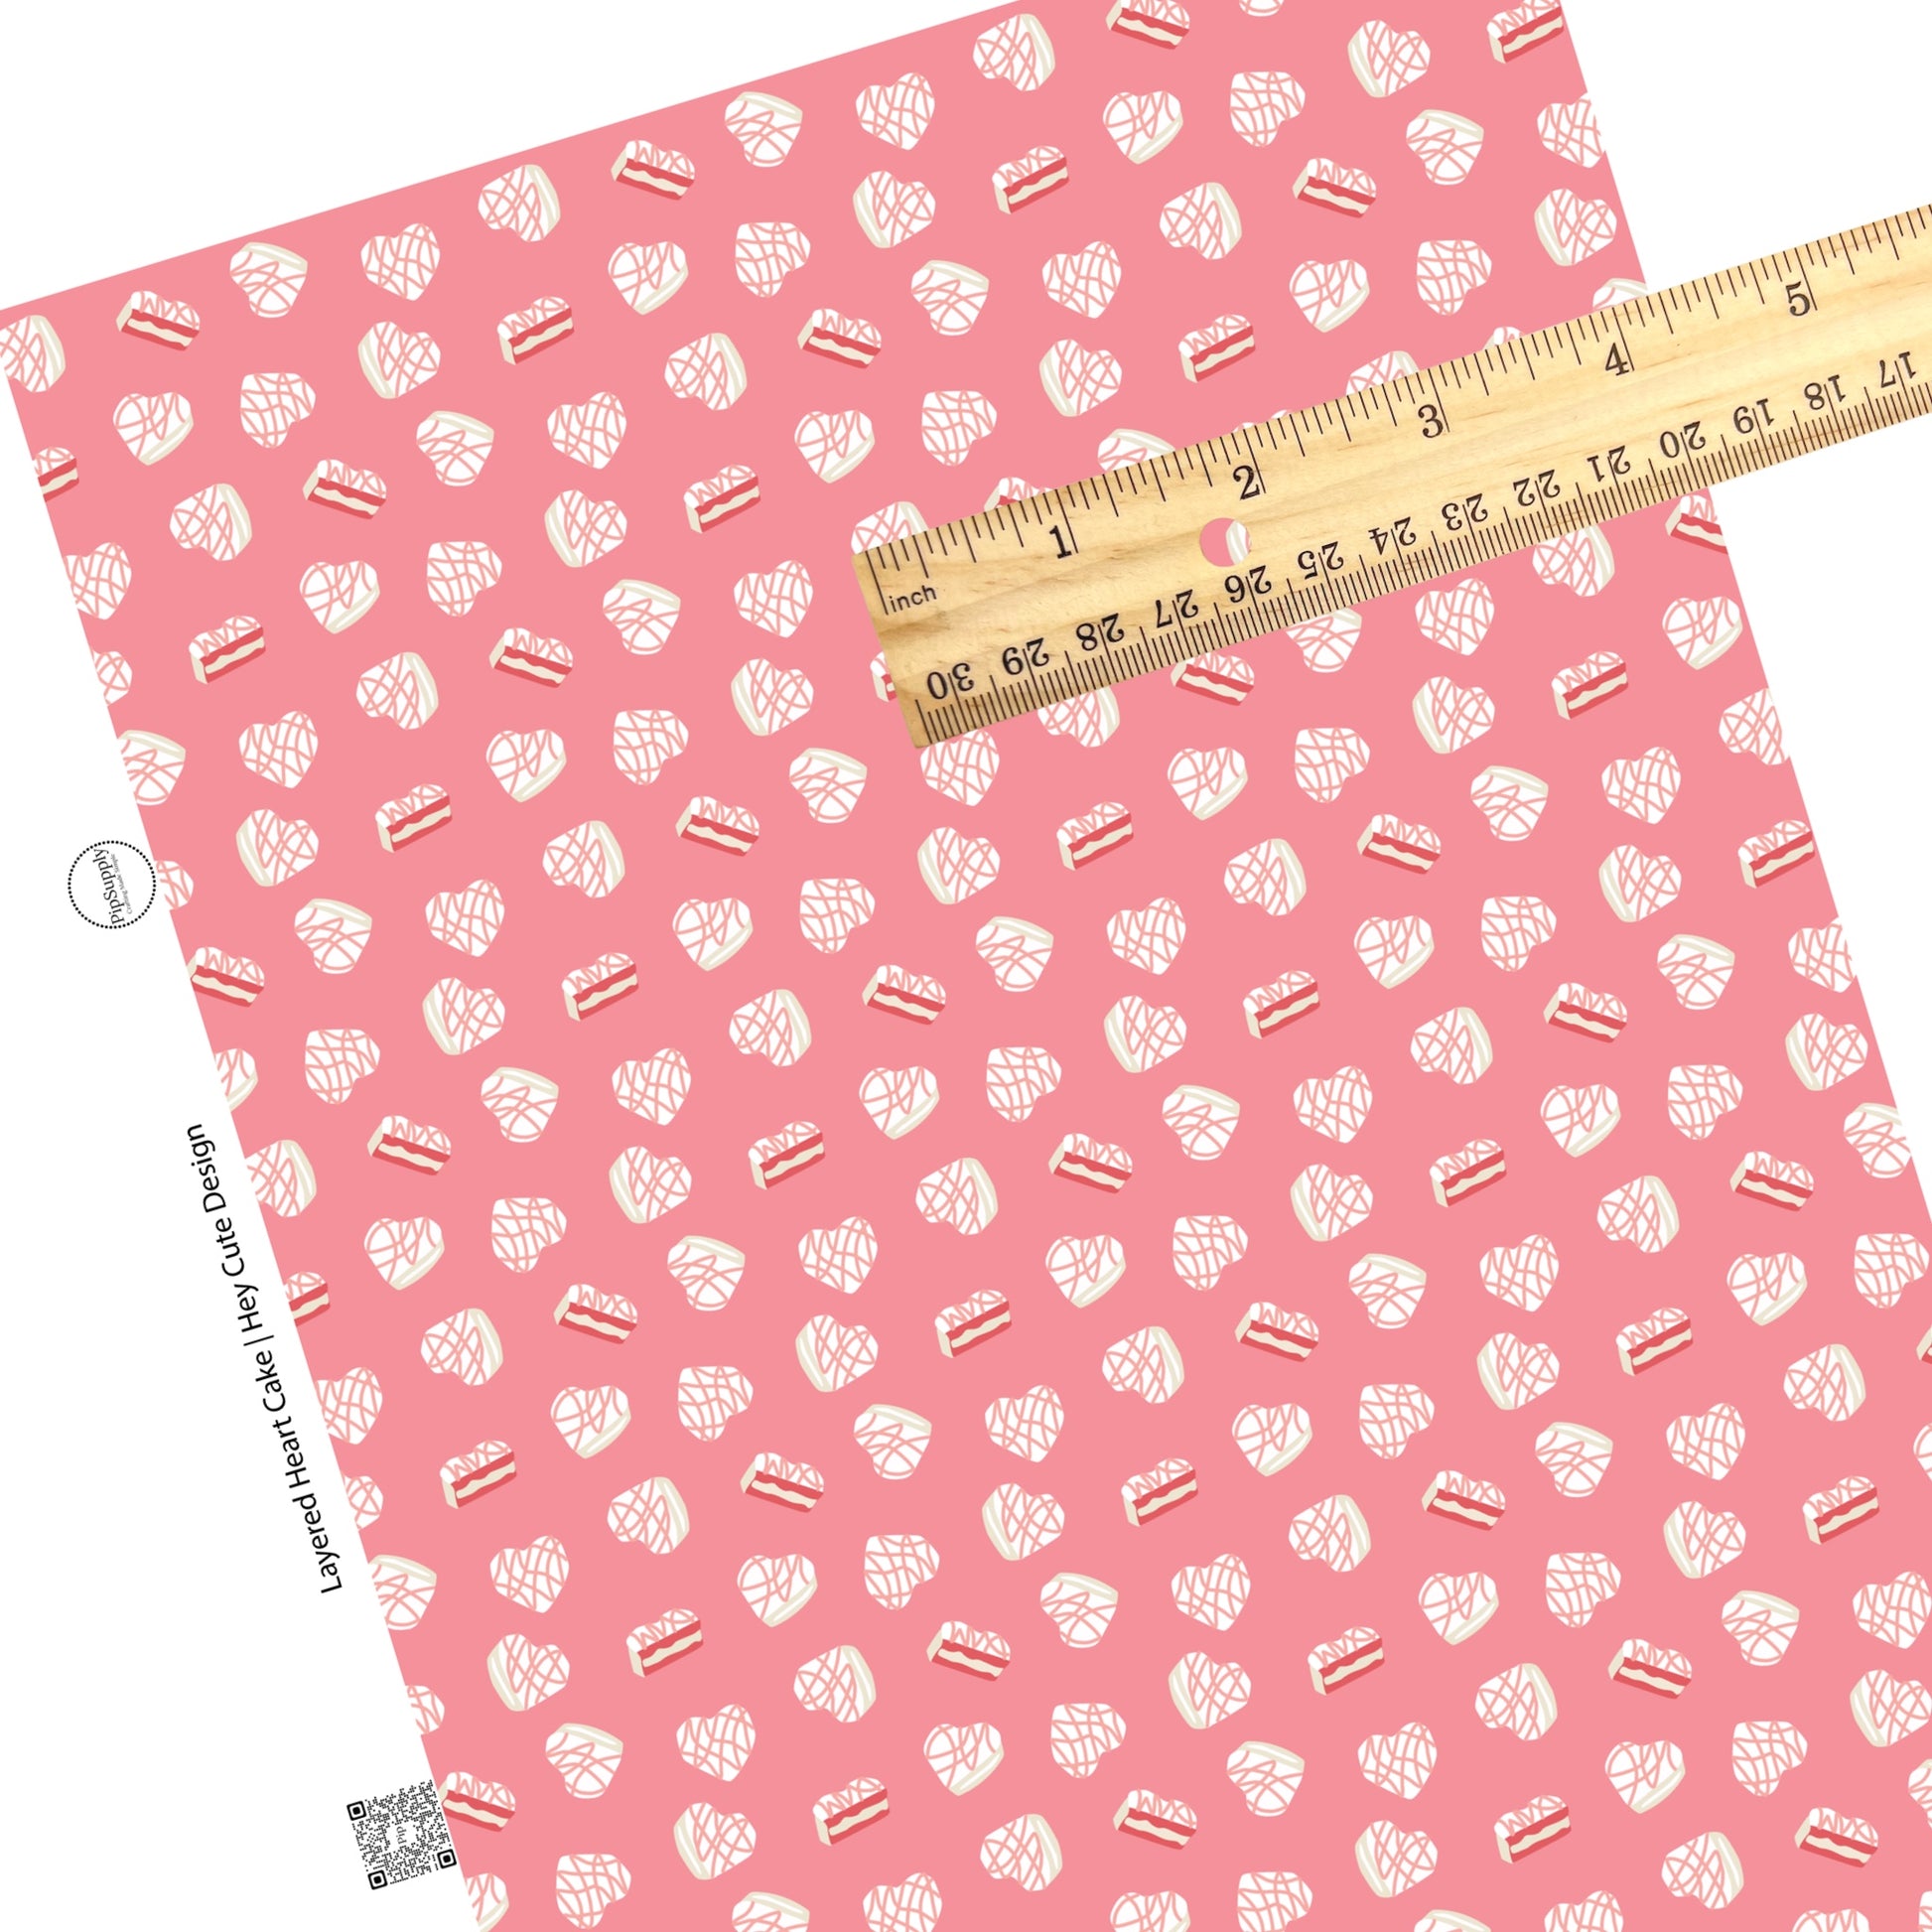 These Valentine's pattern themed faux leather sheets contain the following design elements: cream heart shaped cakes on pink. Our CPSIA compliant faux leather sheets or rolls can be used for all types of crafting projects.